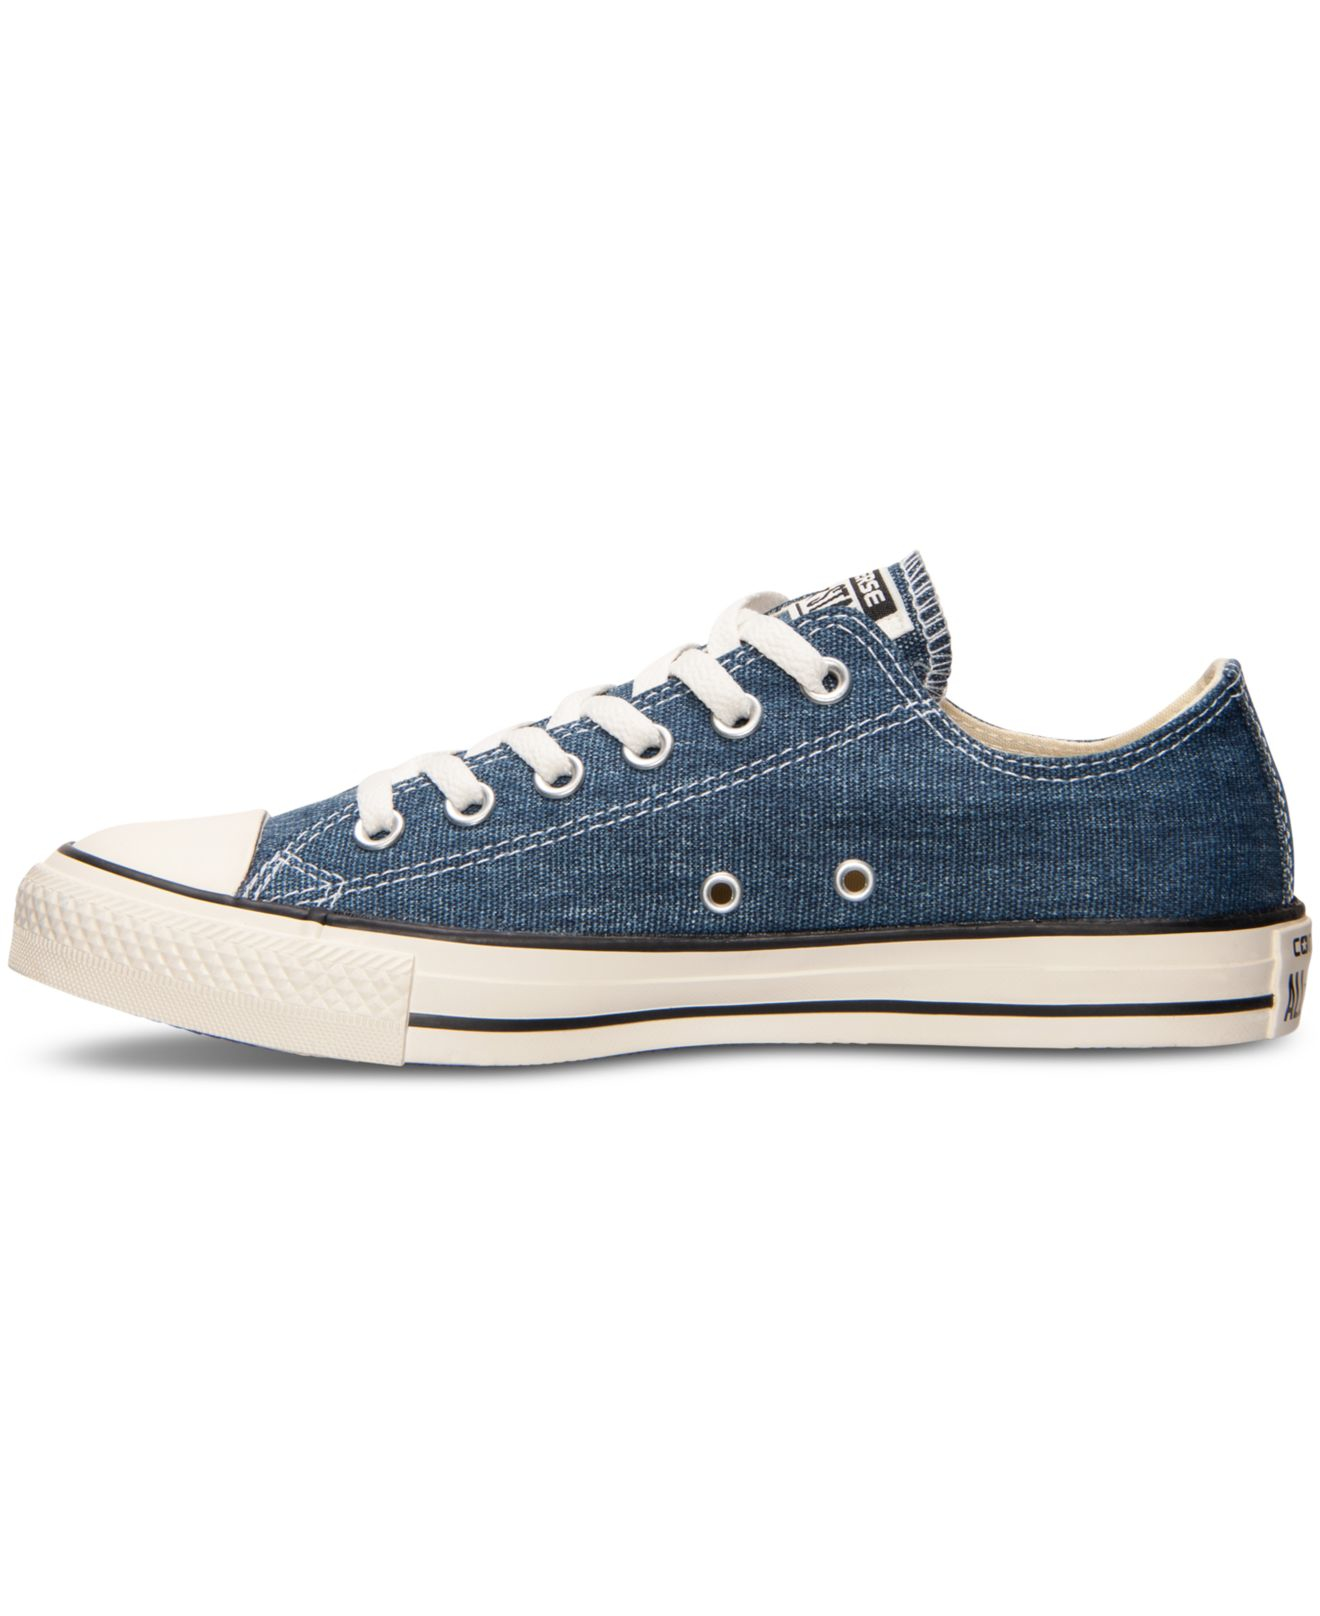 Lyst - Converse Men's Chuck Taylor Ox Denim Casual Sneakers From Finish ...